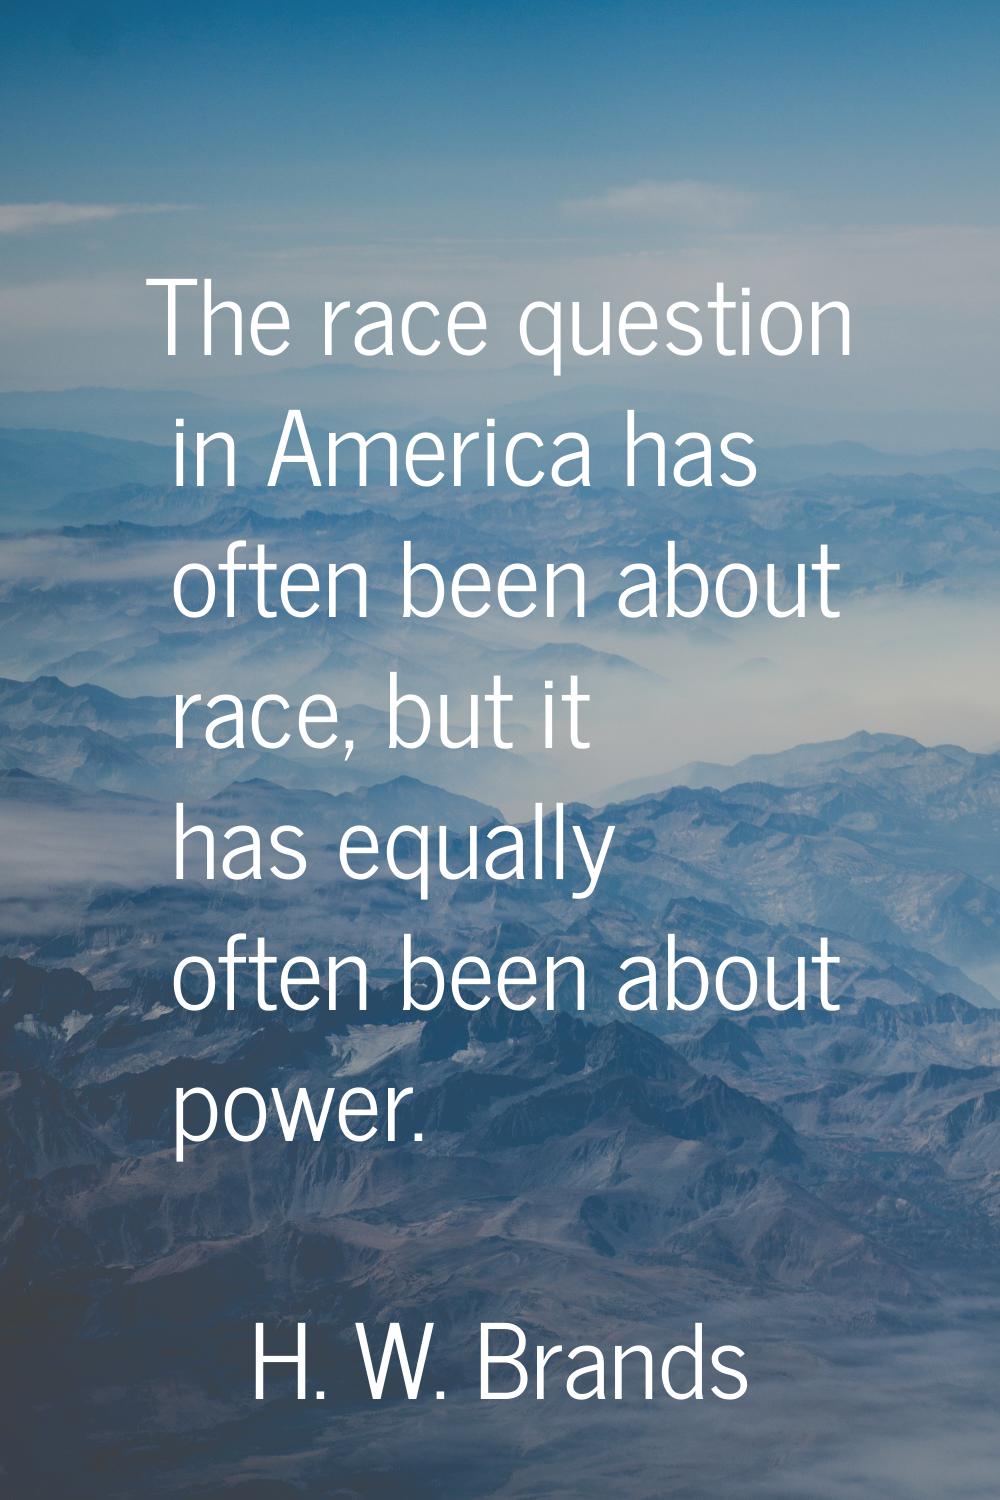 The race question in America has often been about race, but it has equally often been about power.